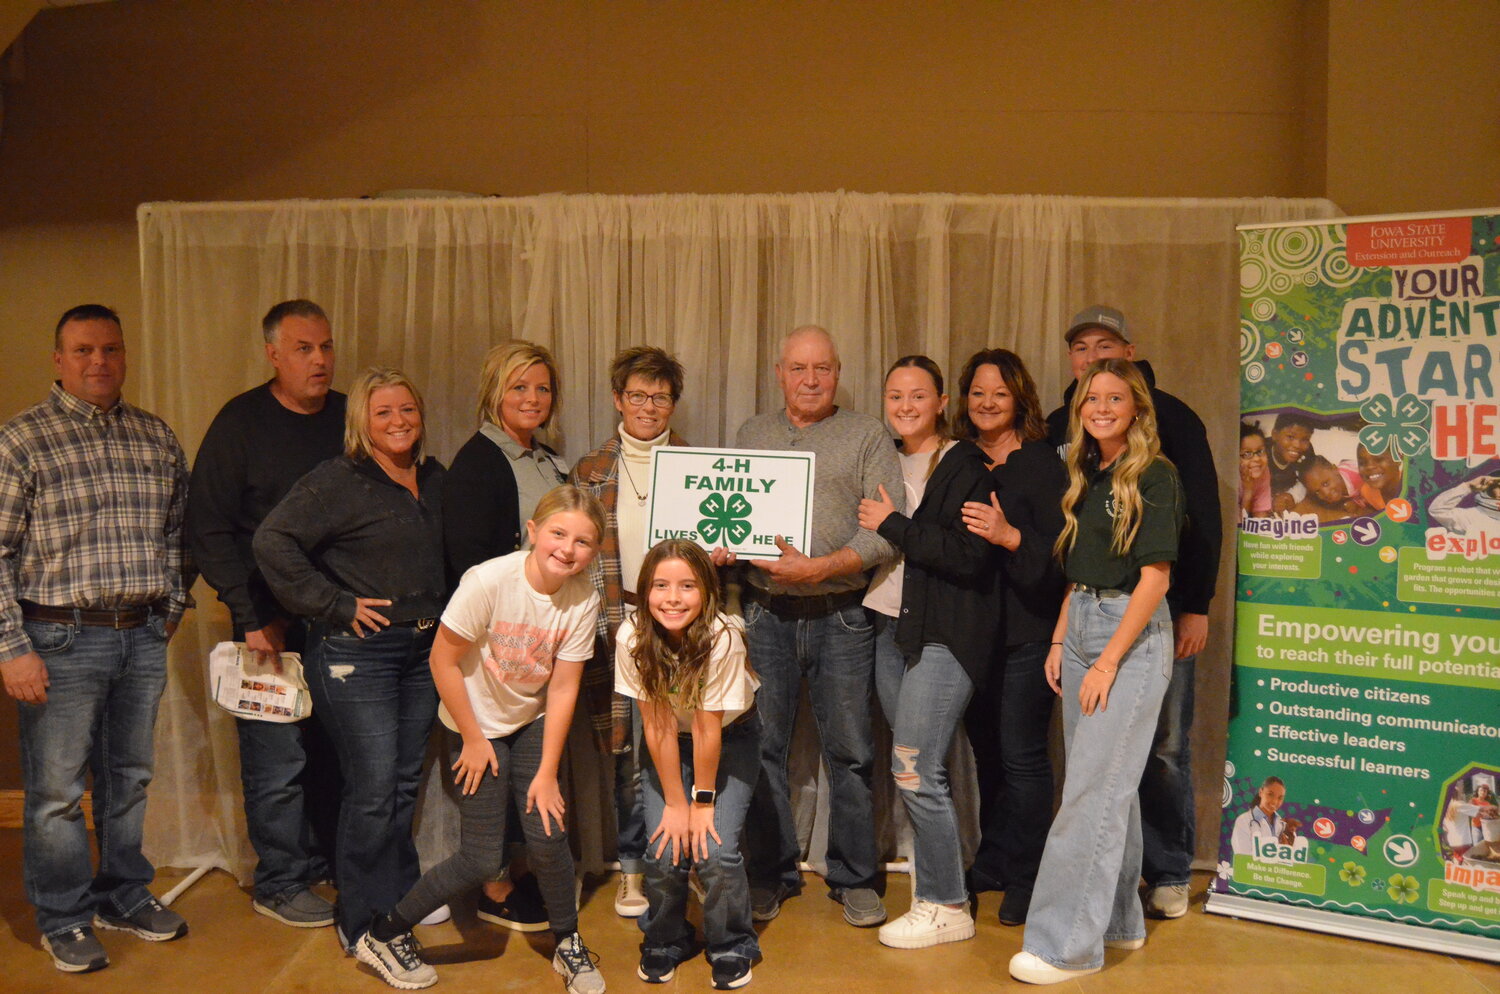 The Brinning family, 4-H Family of the Year.  Front L-R: Aspen Sieren, Brystol Younge.  Back: Chad Younge, Shane Brinning, Shauna Sieren, Shannon Younge, Kathy Brinning, Roger Brinning, Morgan Brinning, Kathleen Brinning, Hunter Sieren, Brynn Younge.